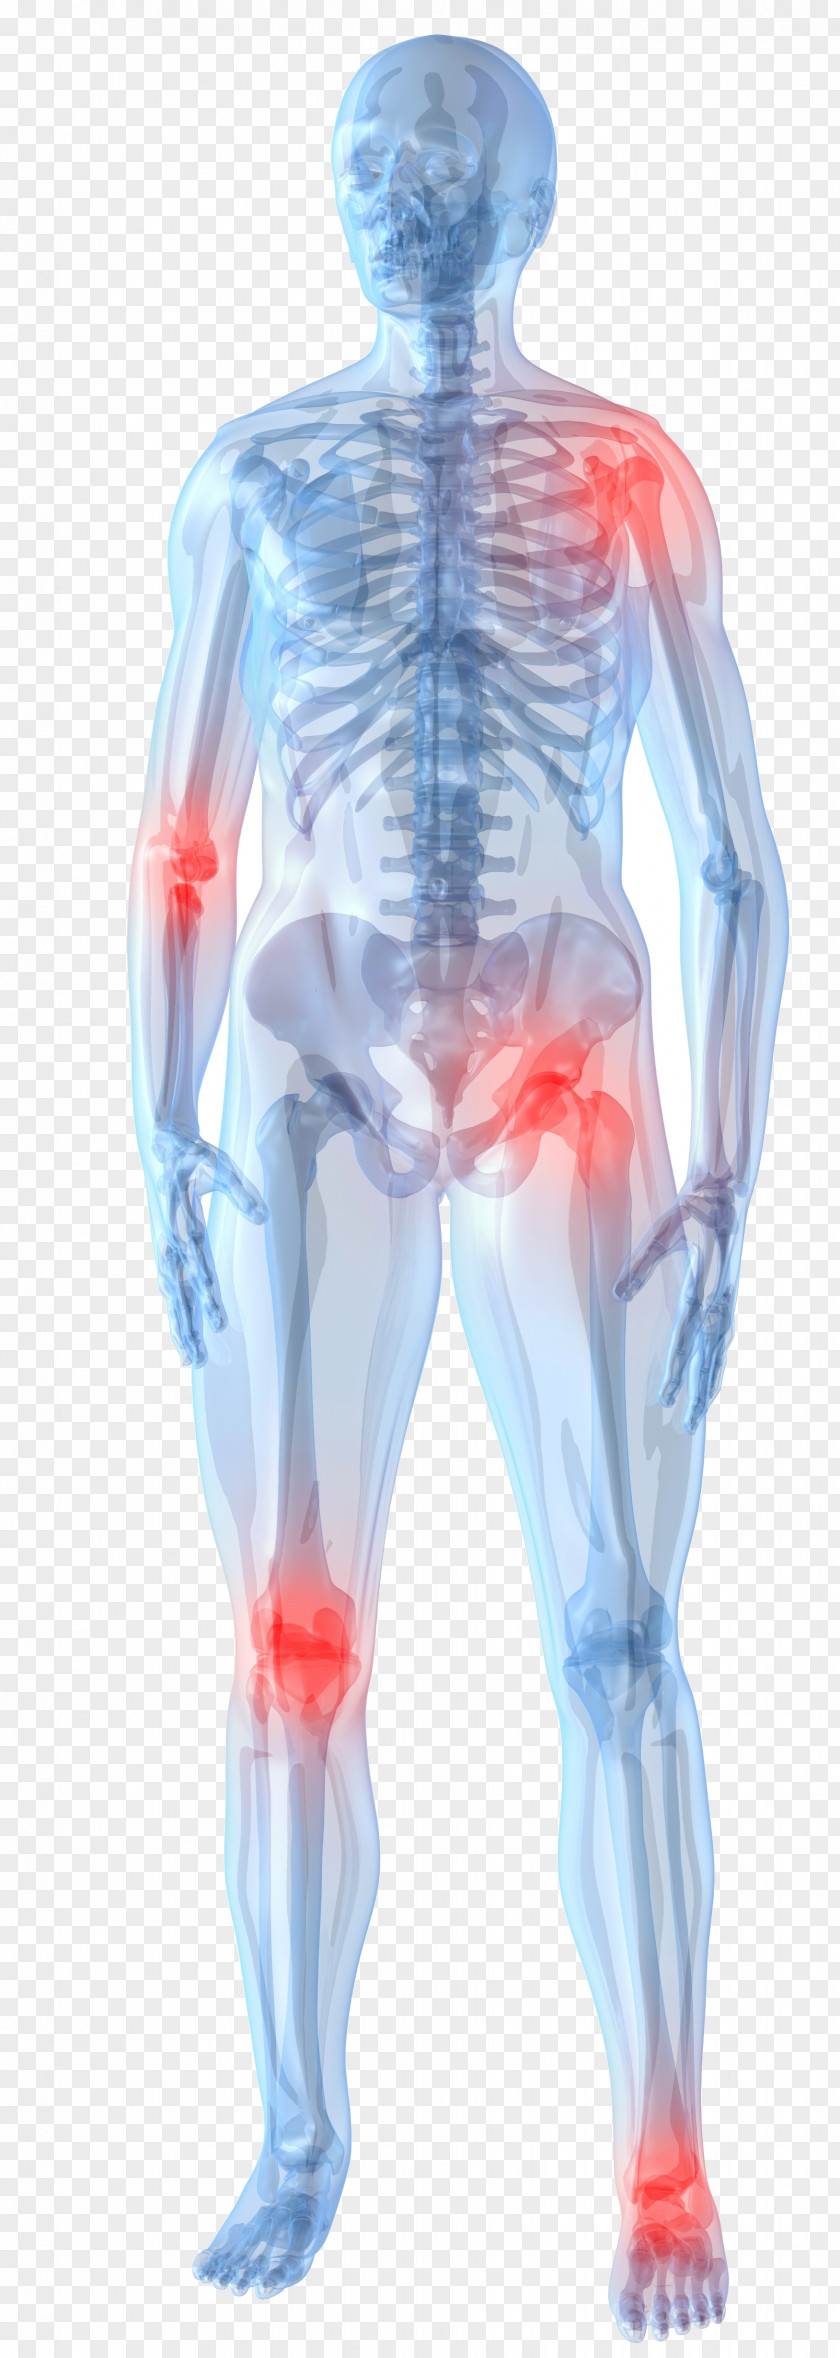 Joint Pain Knee Management Arthritis Therapy PNG